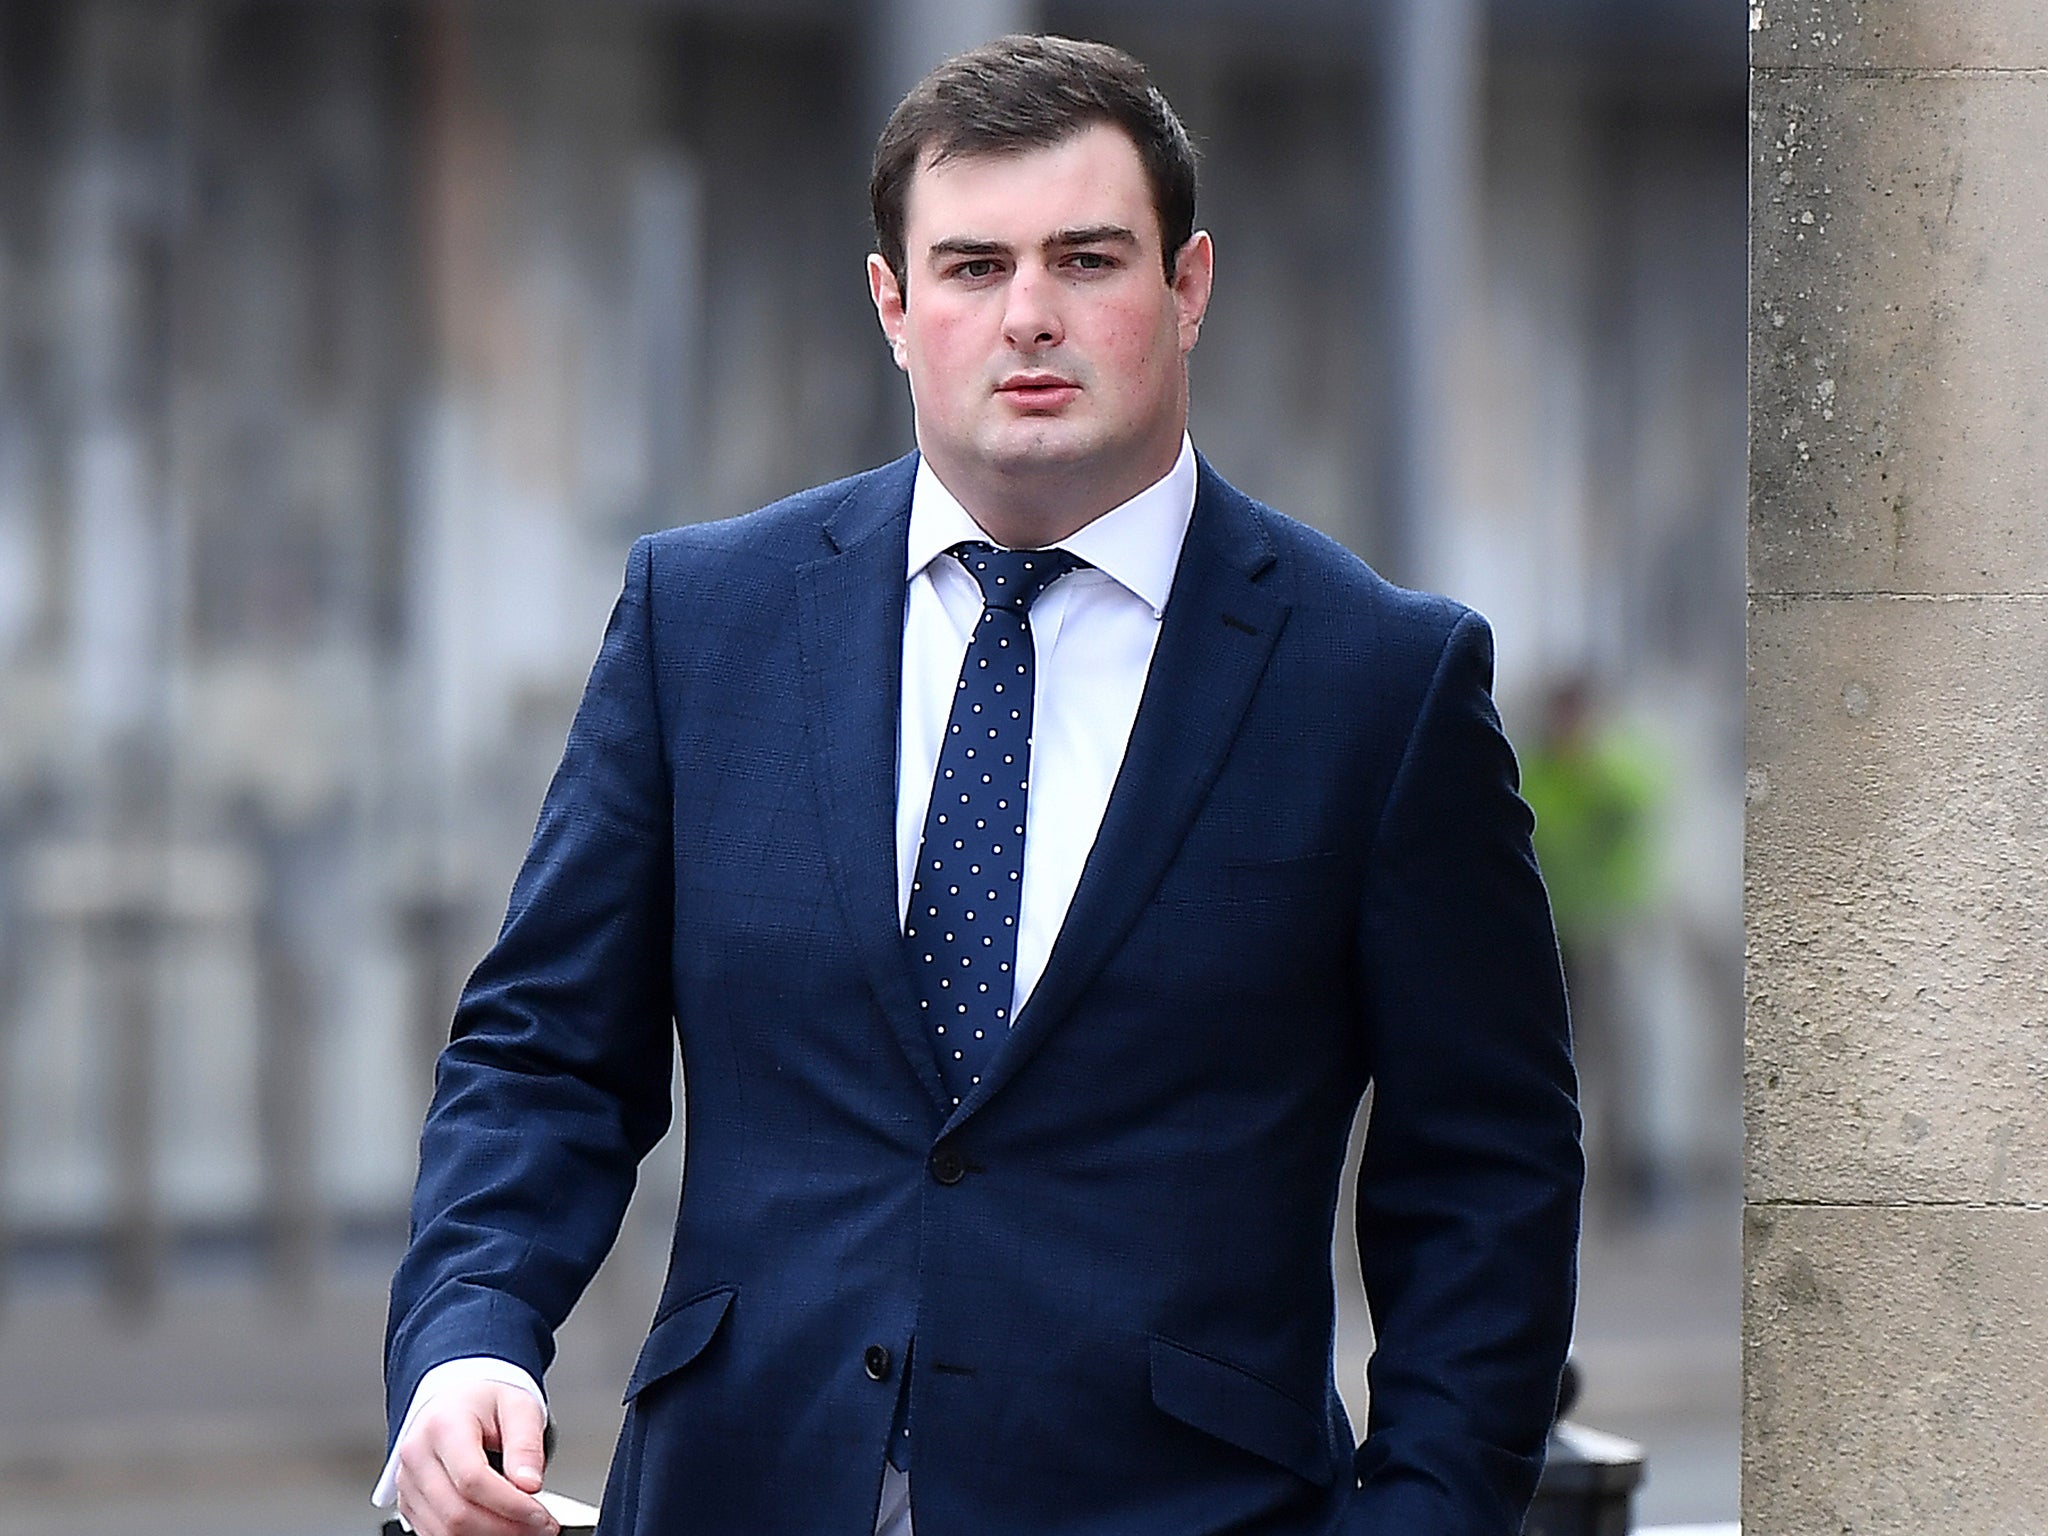 Rory Harrison was found not guilty of withholding information and perverting the course of justice